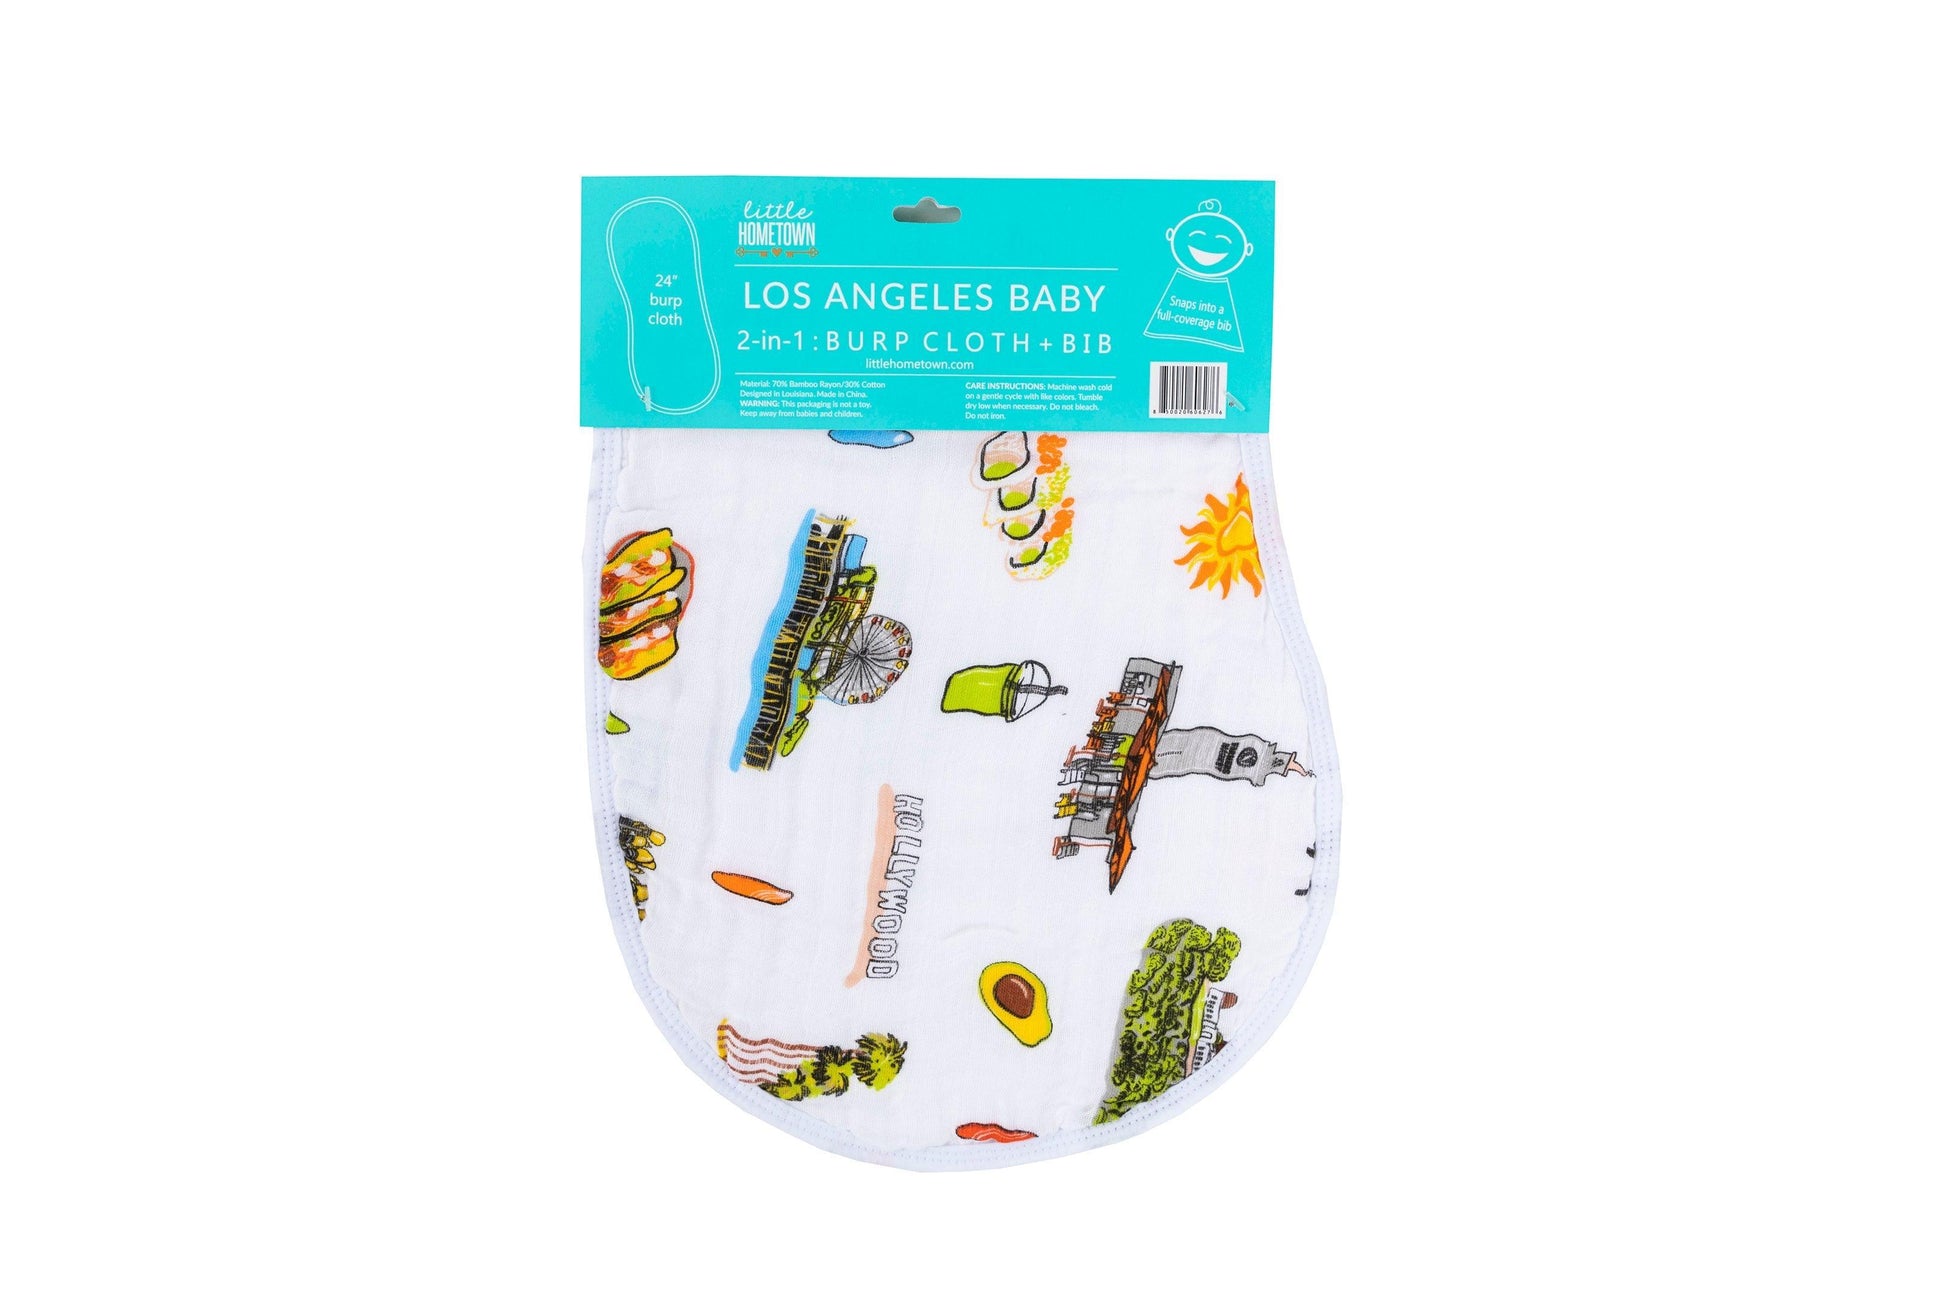 Baby bib and burp cloth set featuring a Los Angeles map design with landmarks, in soft pastel colors.